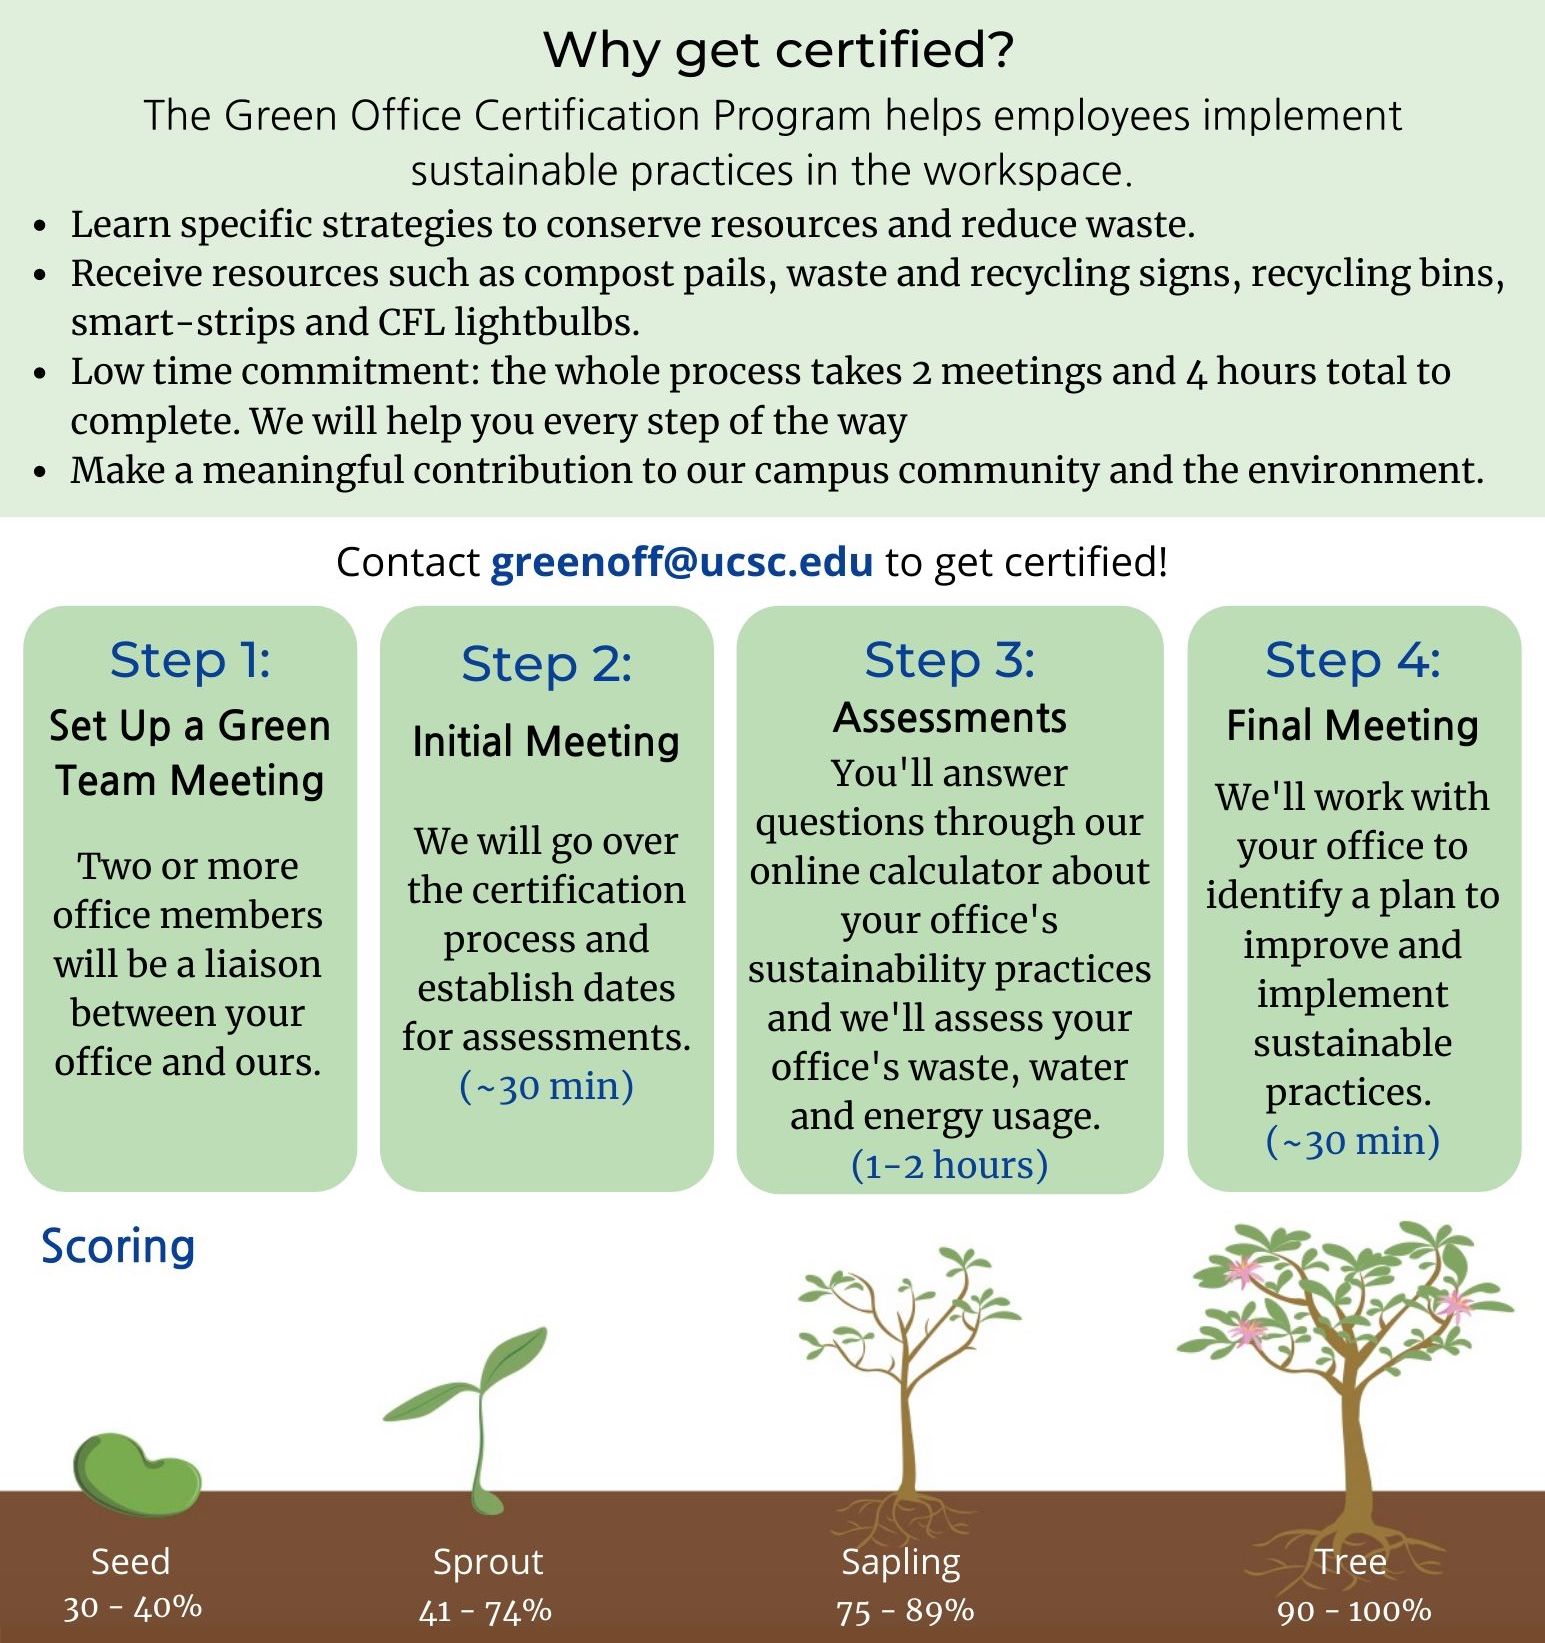 Graphic explaining the benefits of getting Green Office Certified, the steps for certifications, and the levels of certification. All of the graphic's information is repeated in the website text below. 